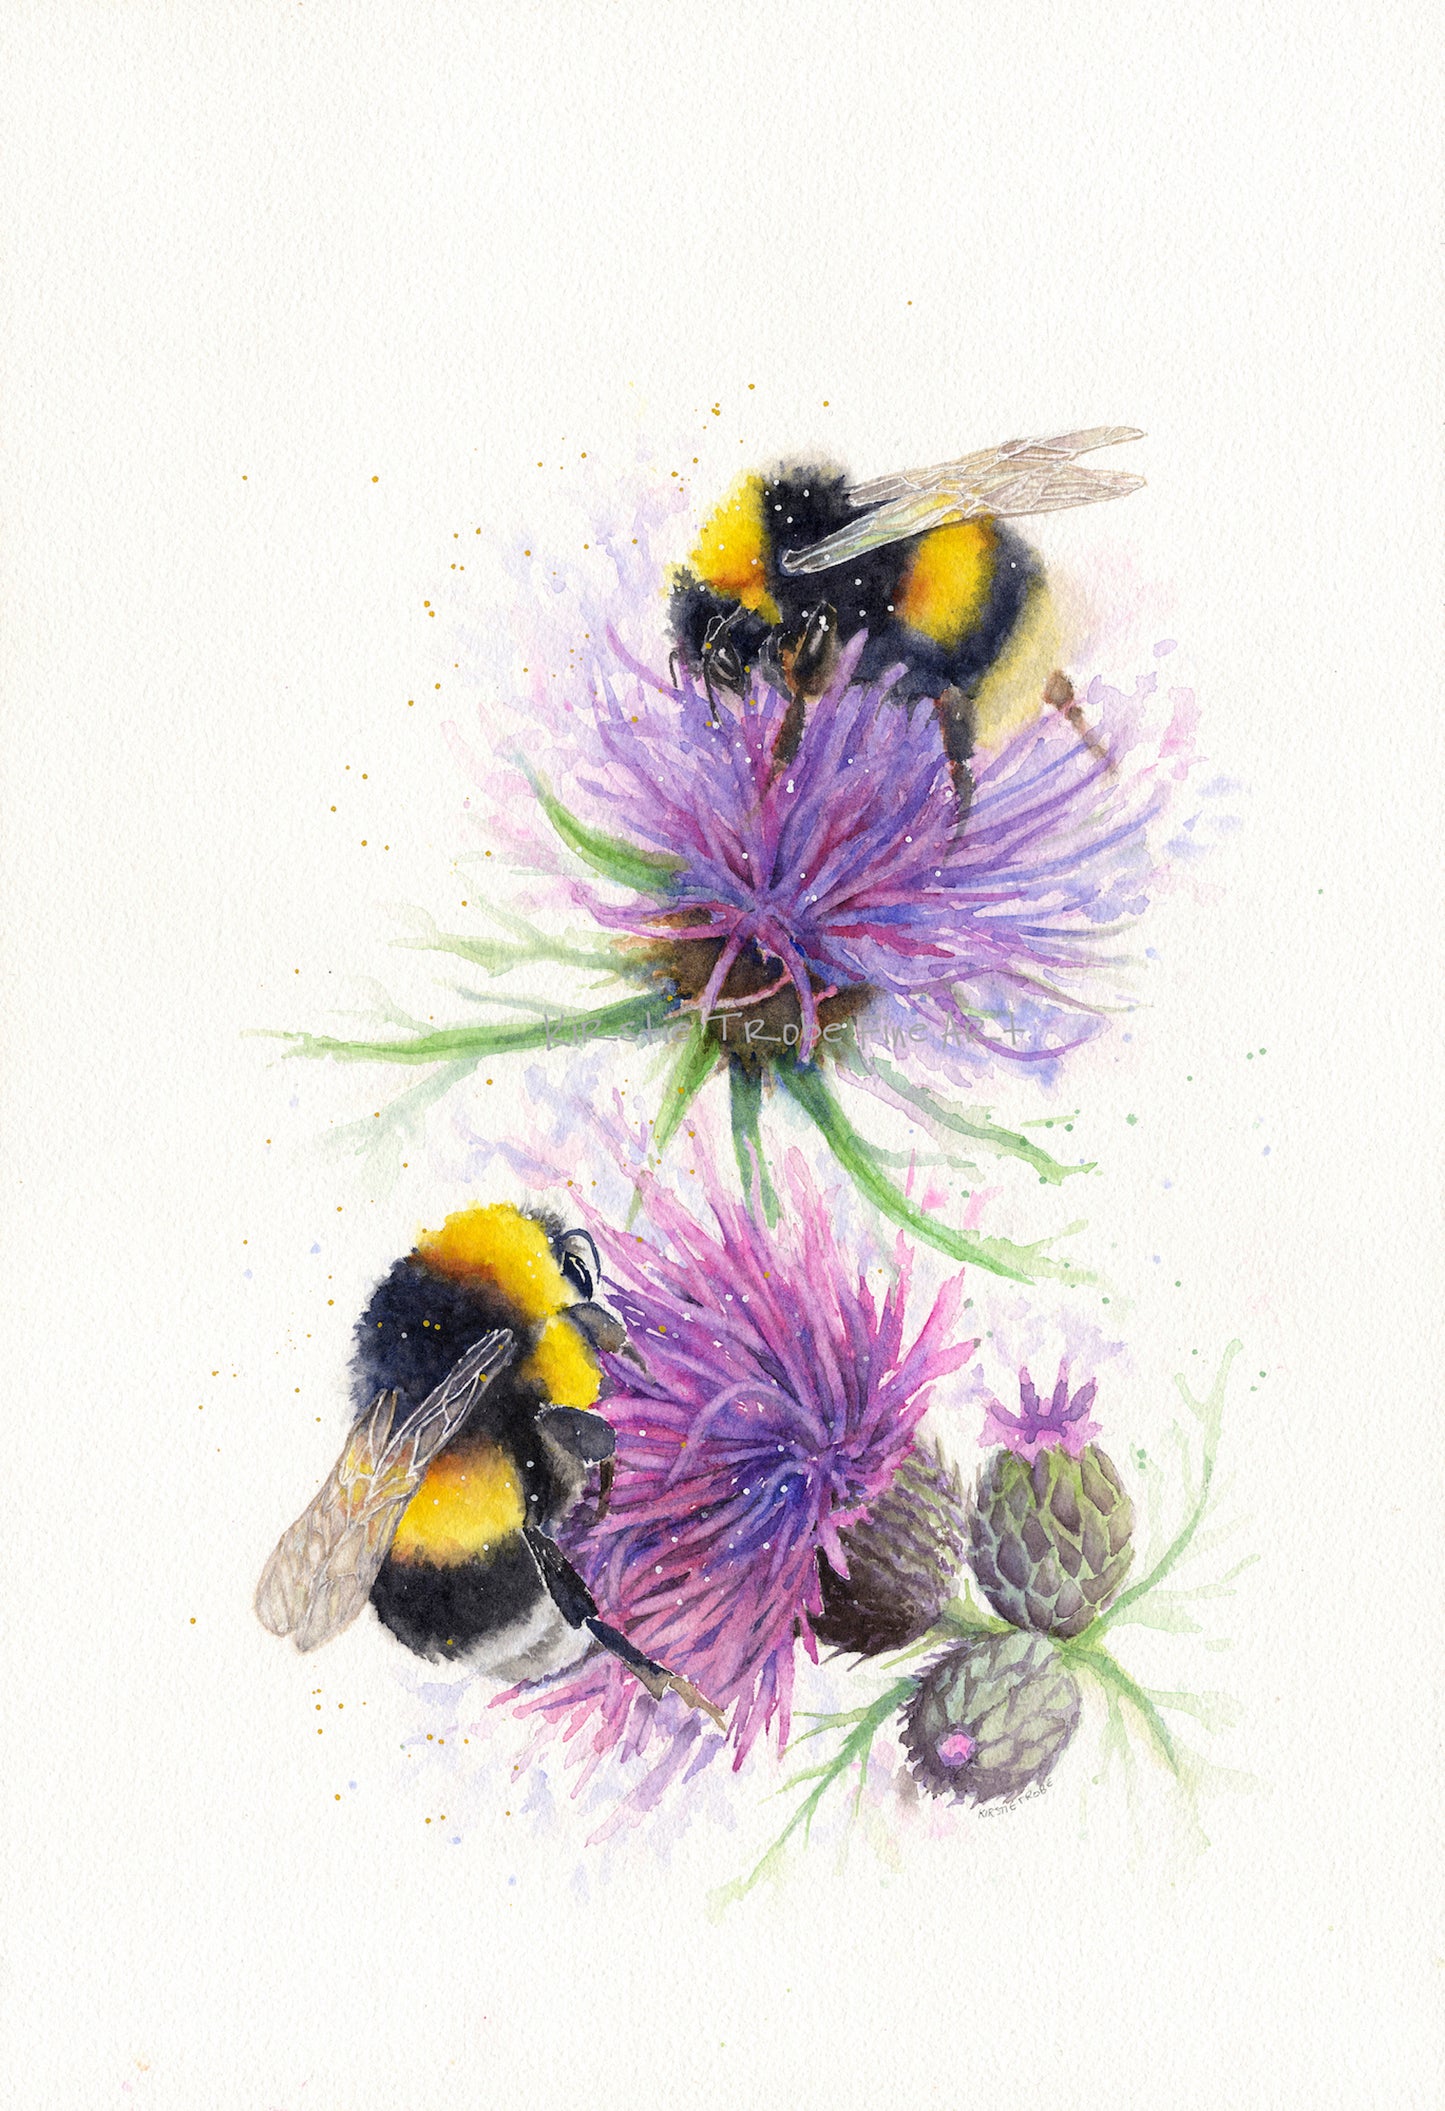 Two fluffy, fuzzy bumble bees feed on two thistles. The yellow and black of their fur contrasts with the purple pink of the thistle flowers. The bees are positioned one above the other in a portrait orientation